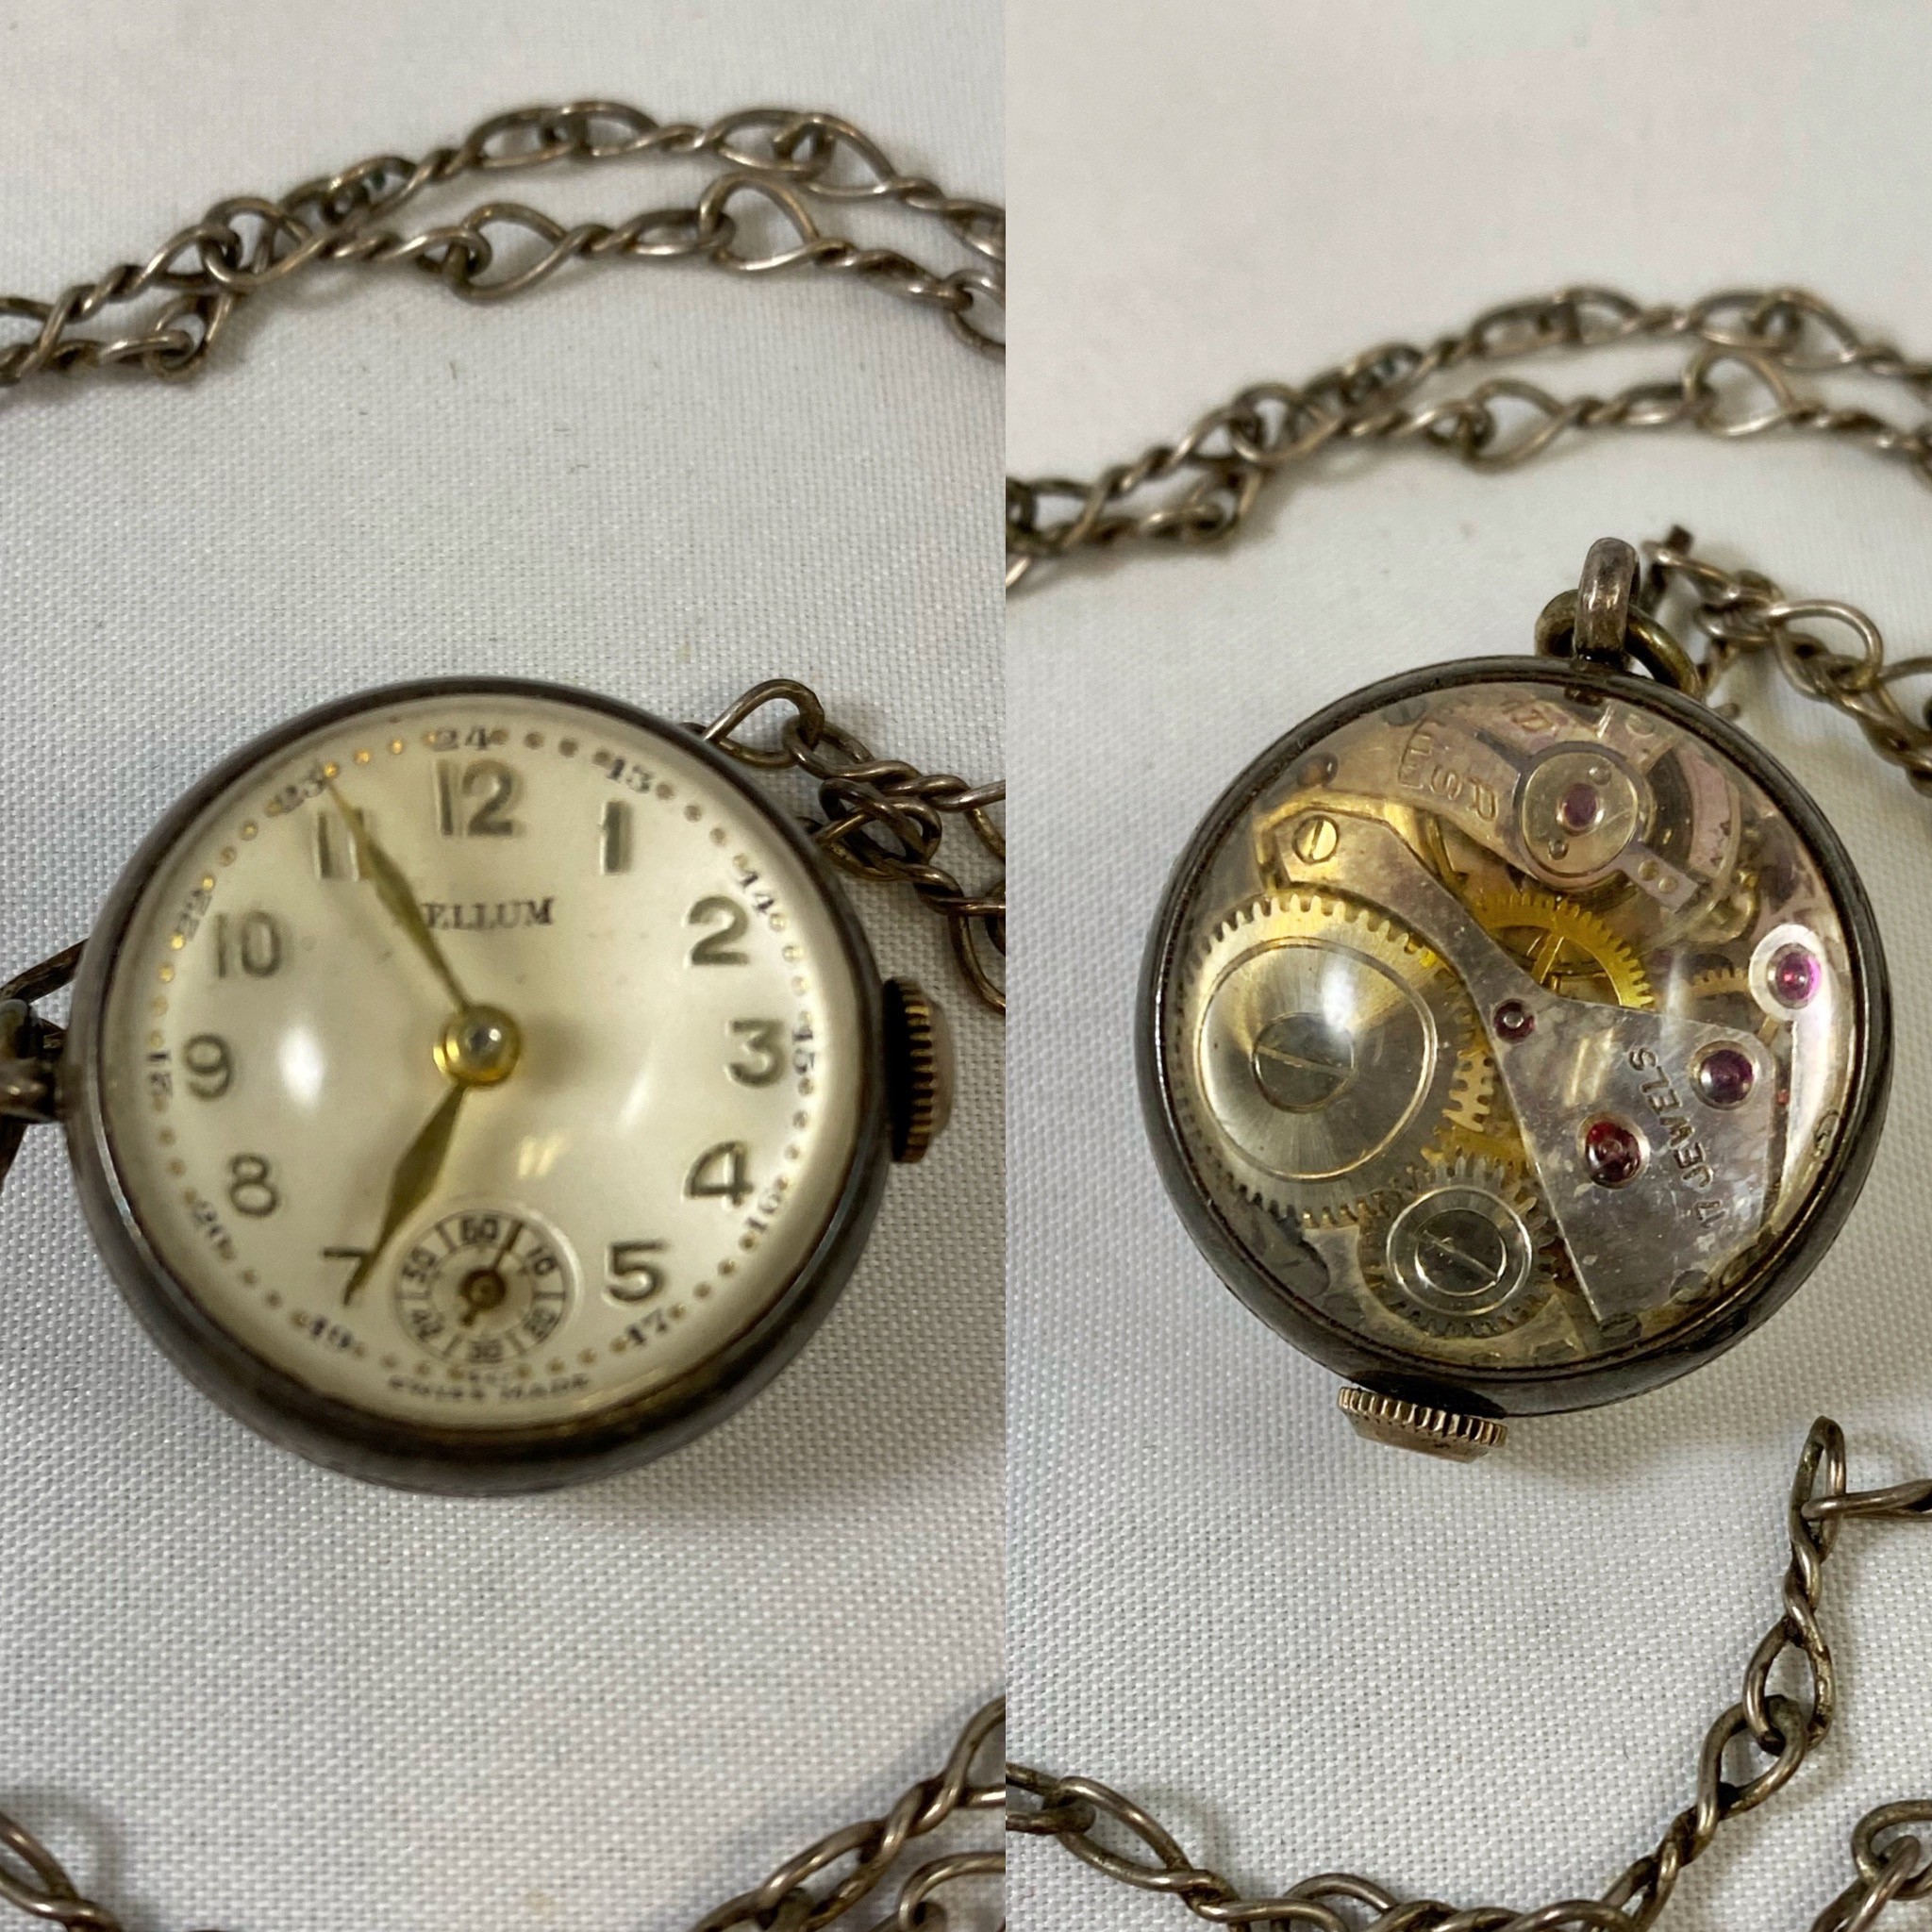 Lot 1691: Silver Colored Rellum Pendant Watch with Chain (17 Jewels)